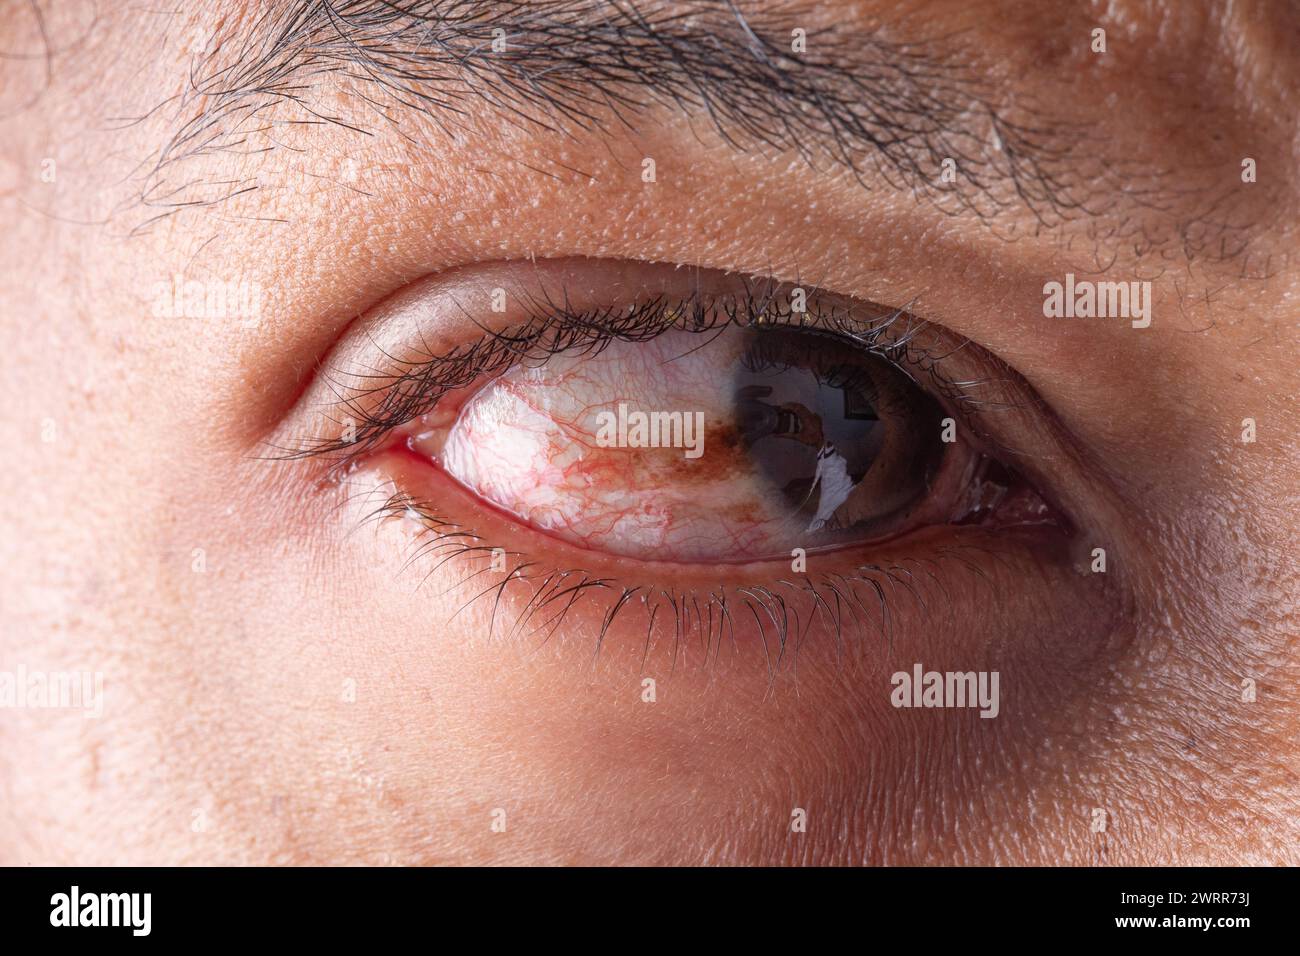 Detailed image of an eye condition known as Pterygium Stock Photo